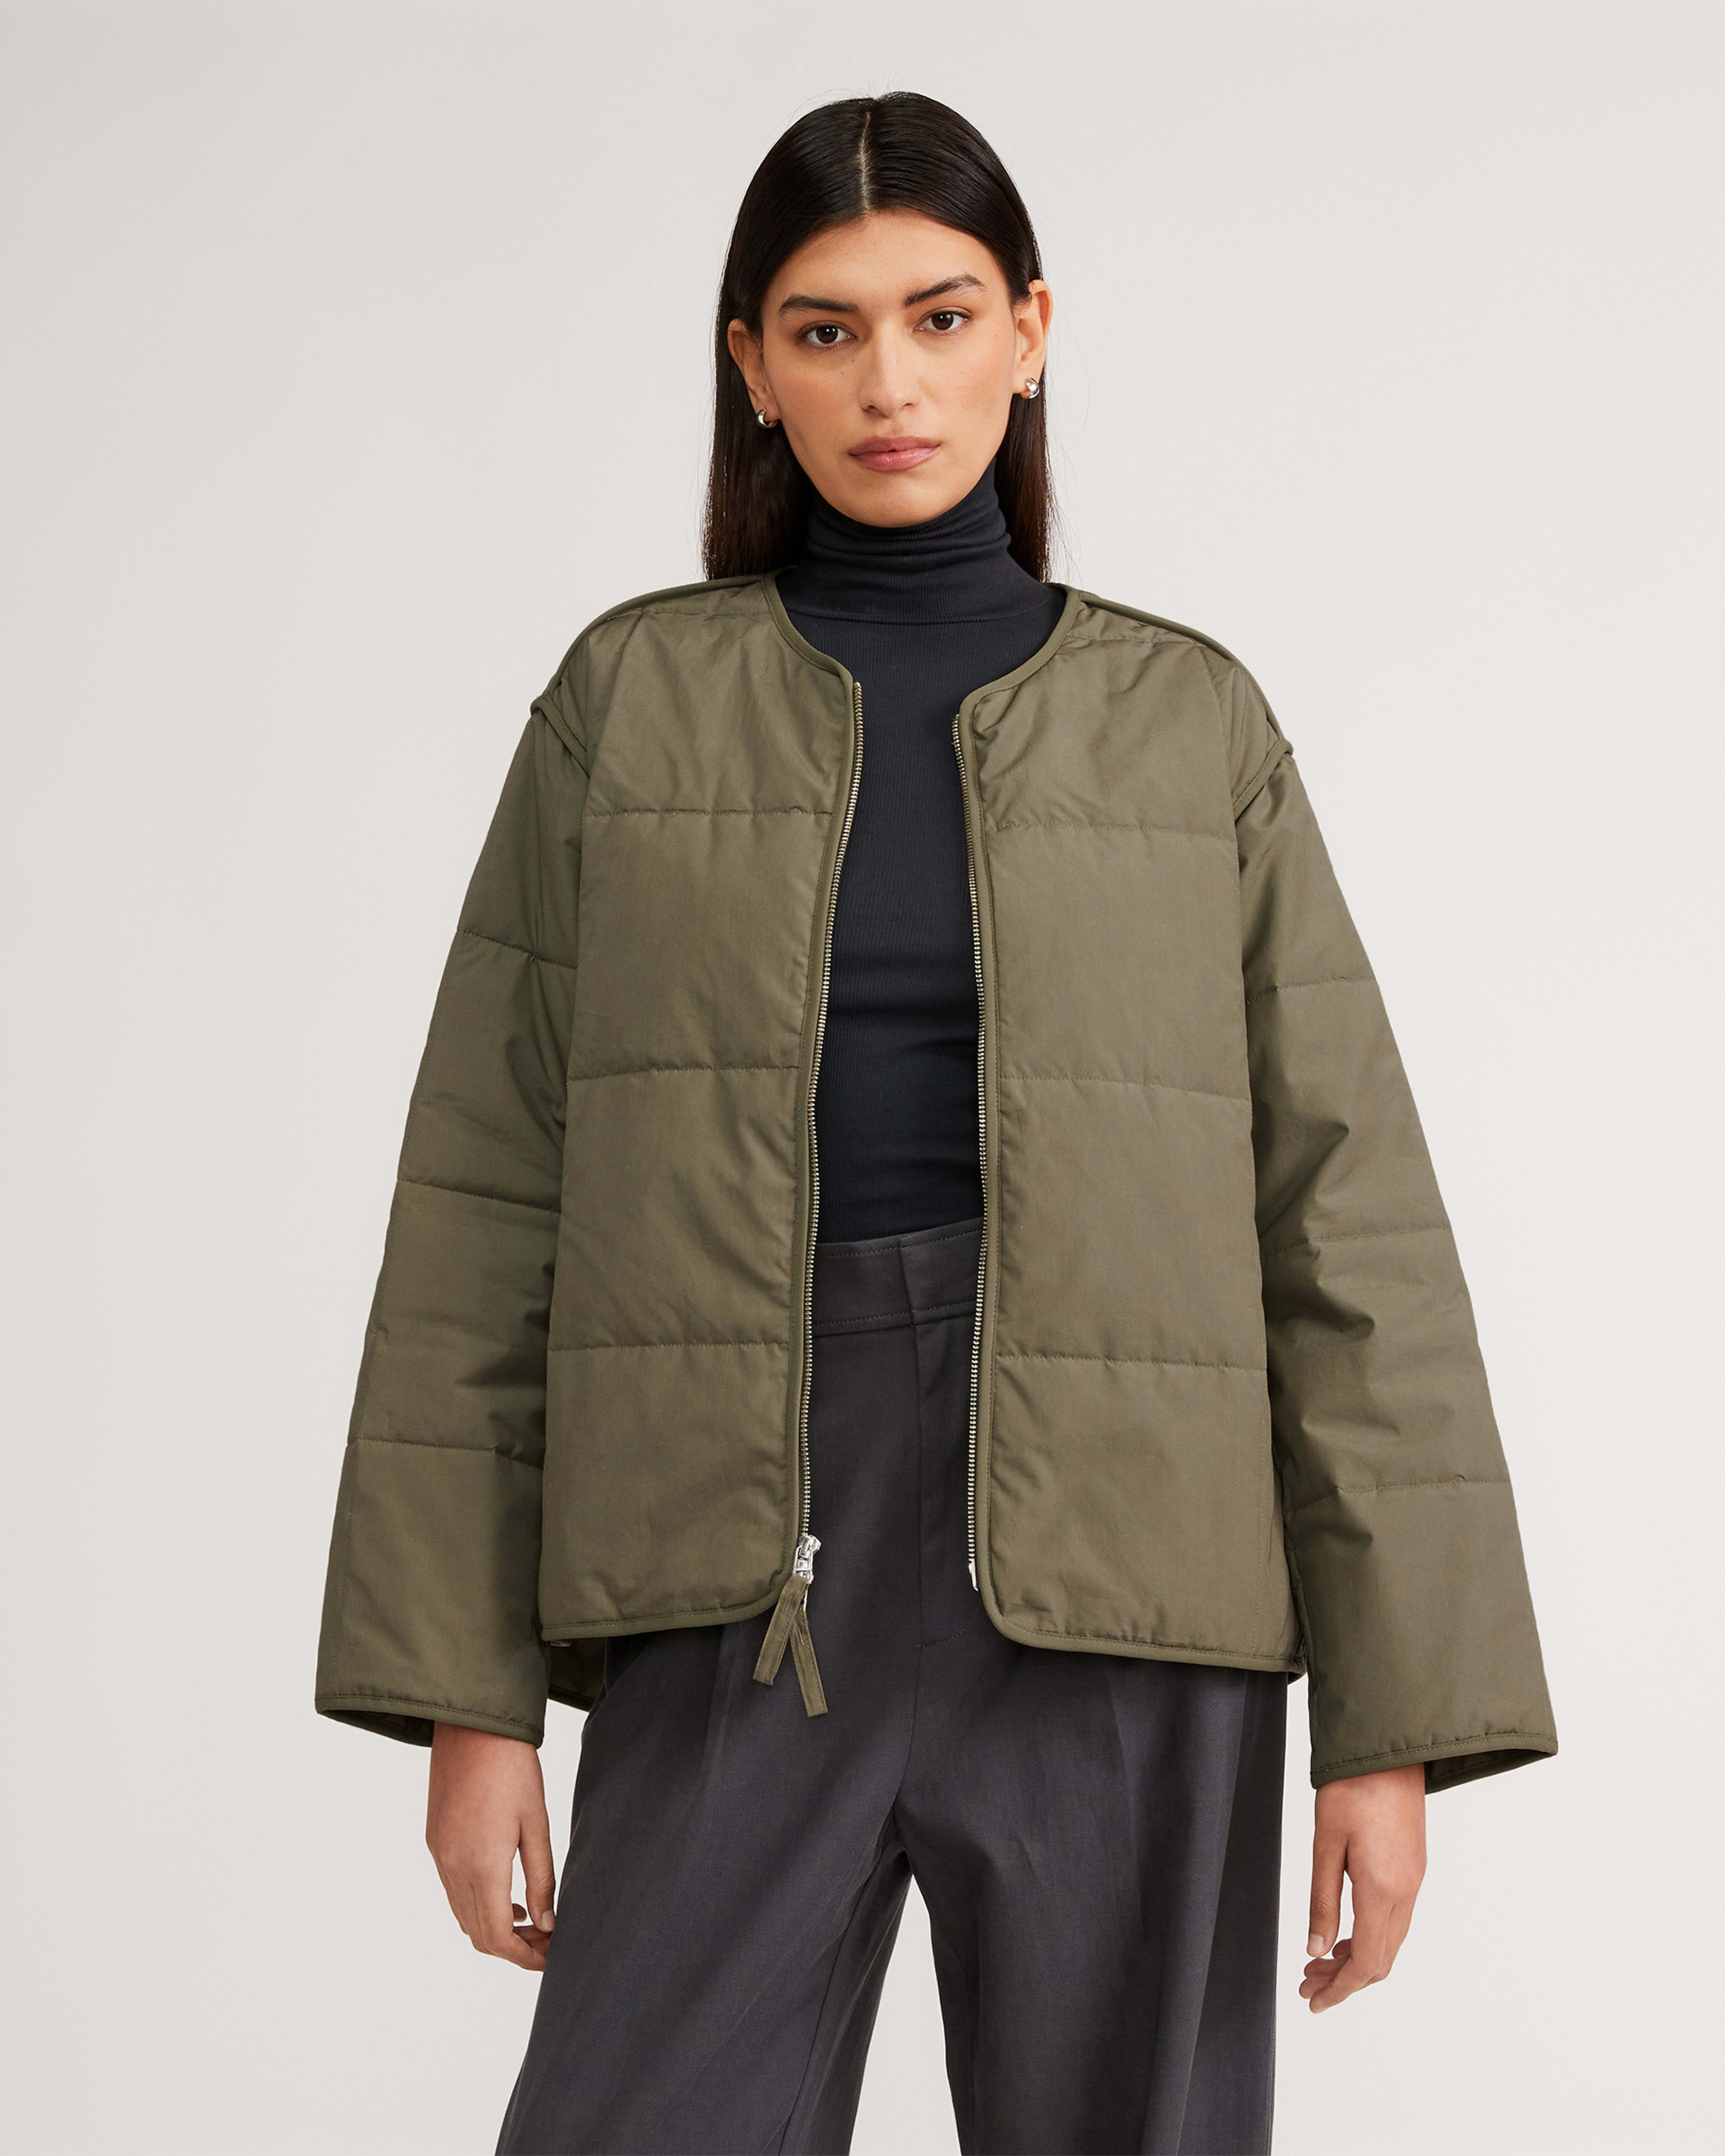 NWT Everlane The ReNew Long Liner in Kalamata Green Oversized Quilted Coat  L